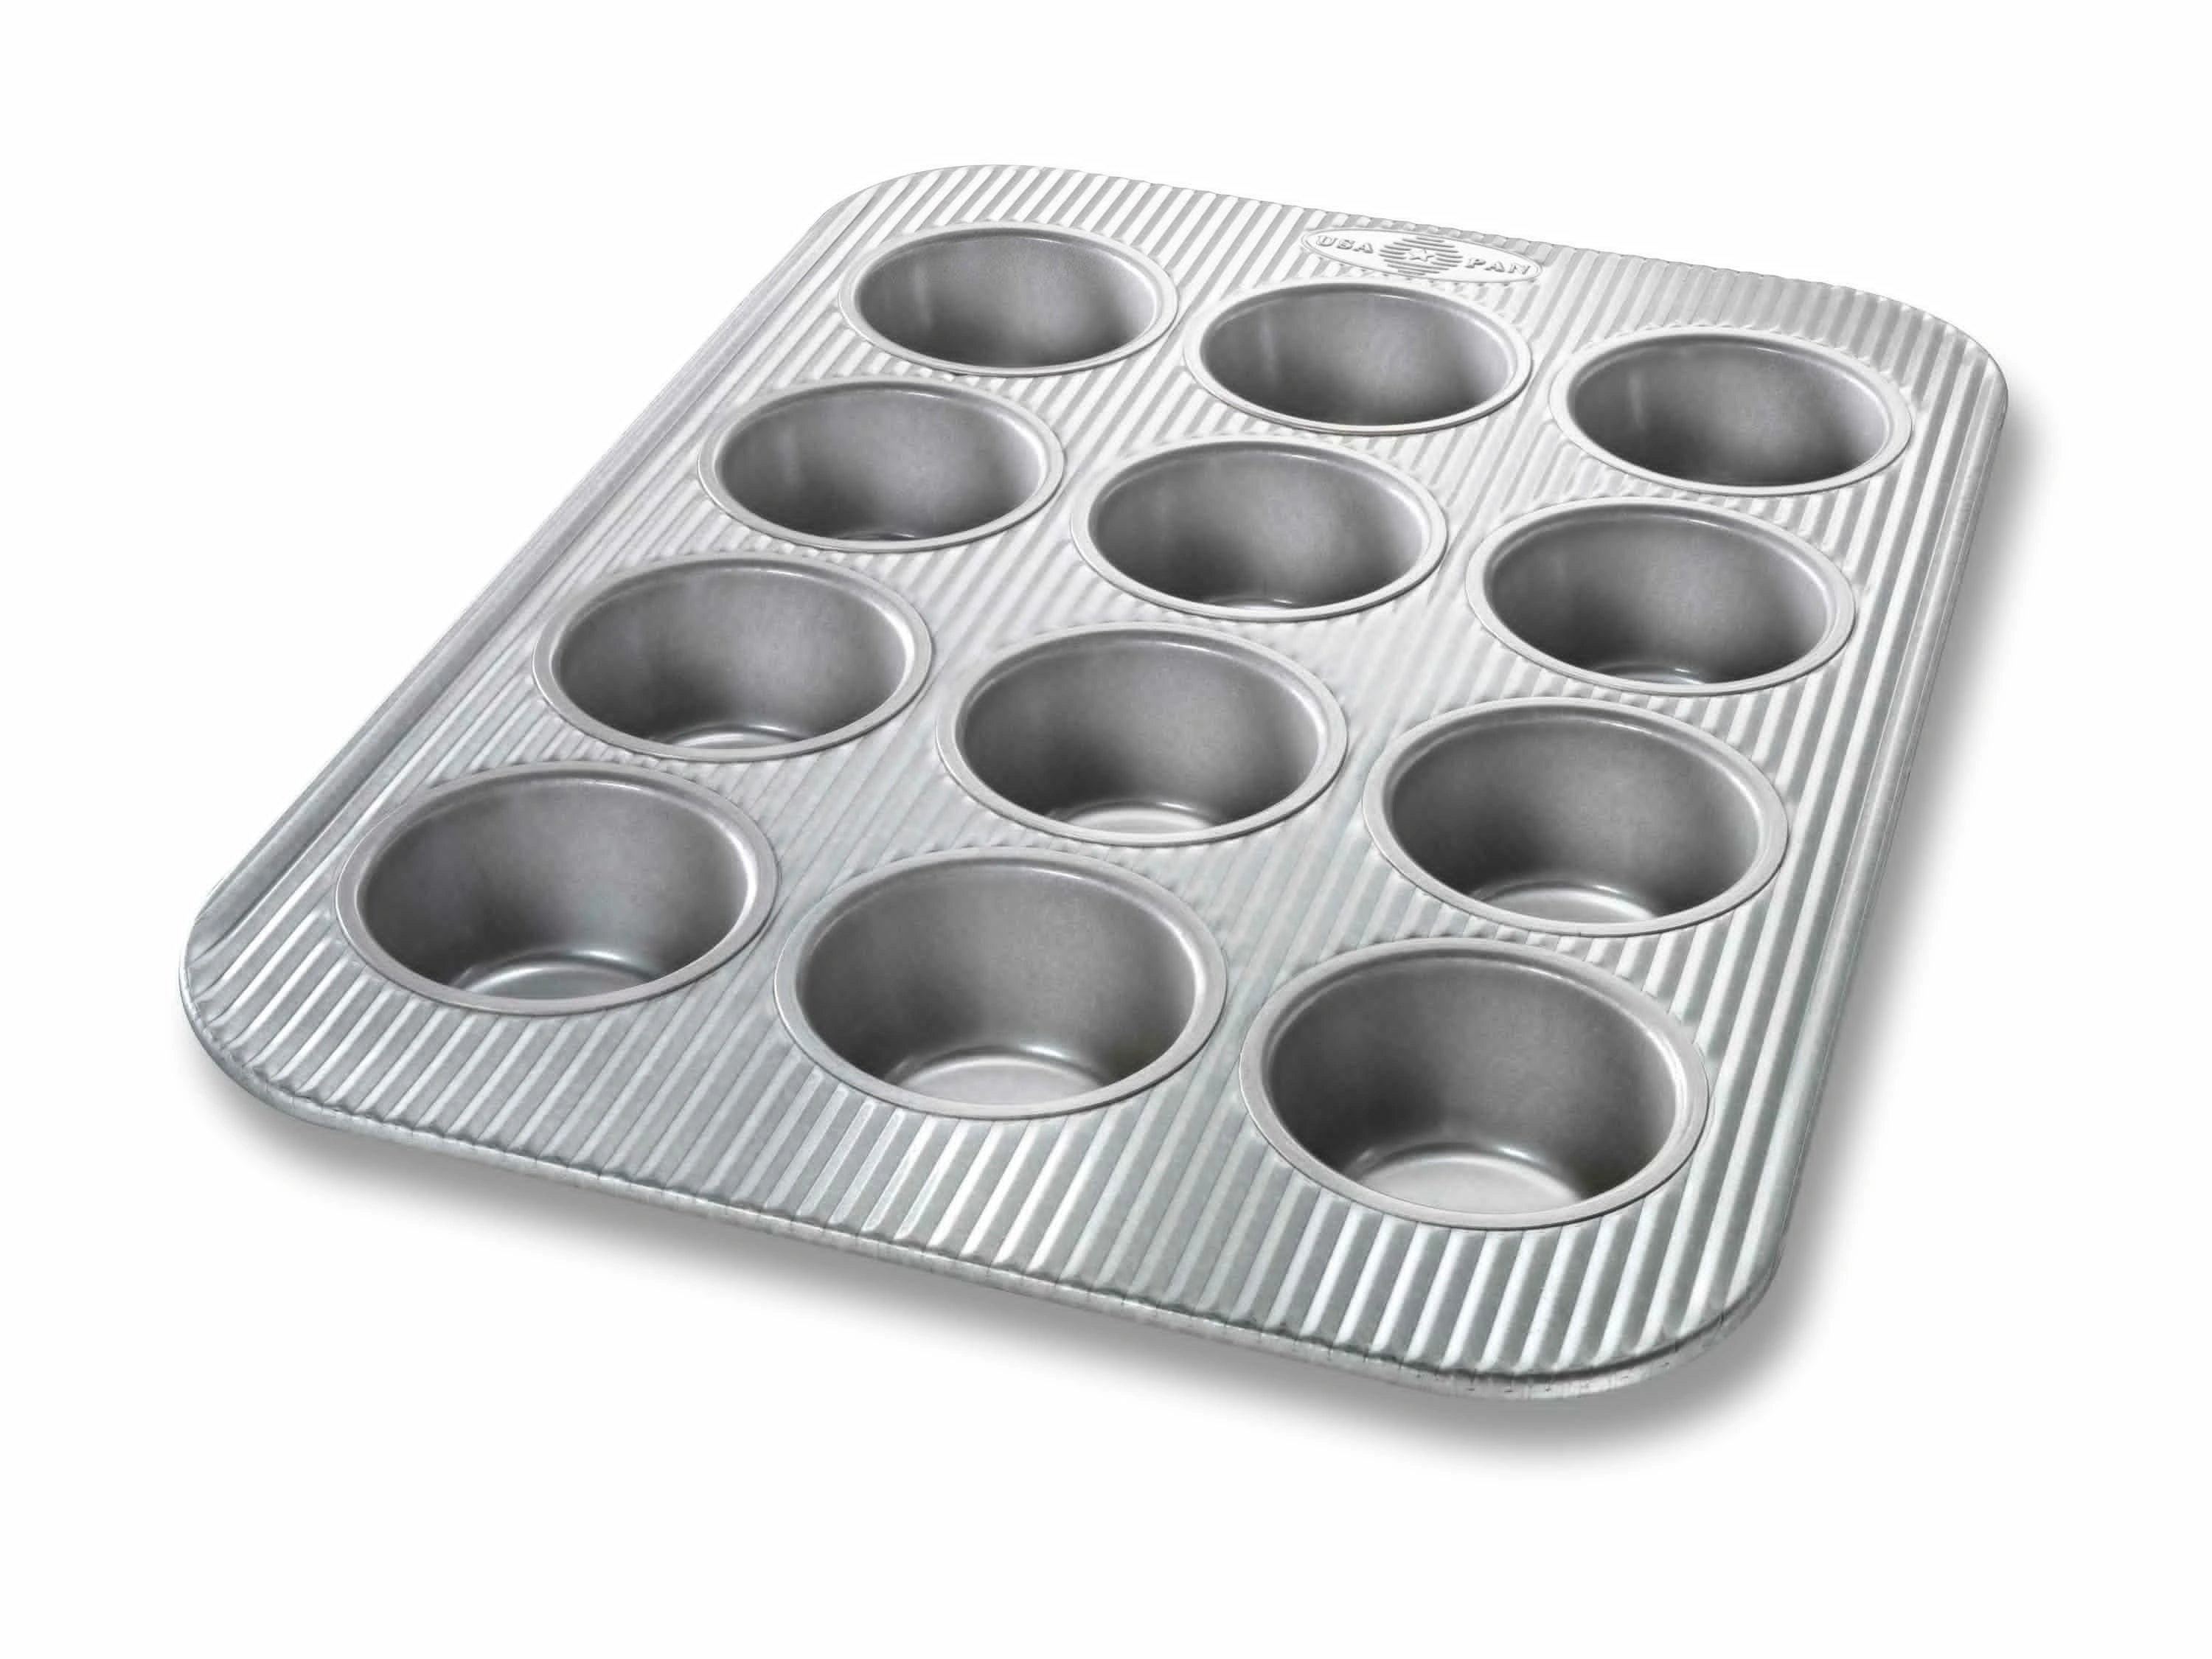 USA Pan Muffin Pan with lid but the picture doesn't show the lid